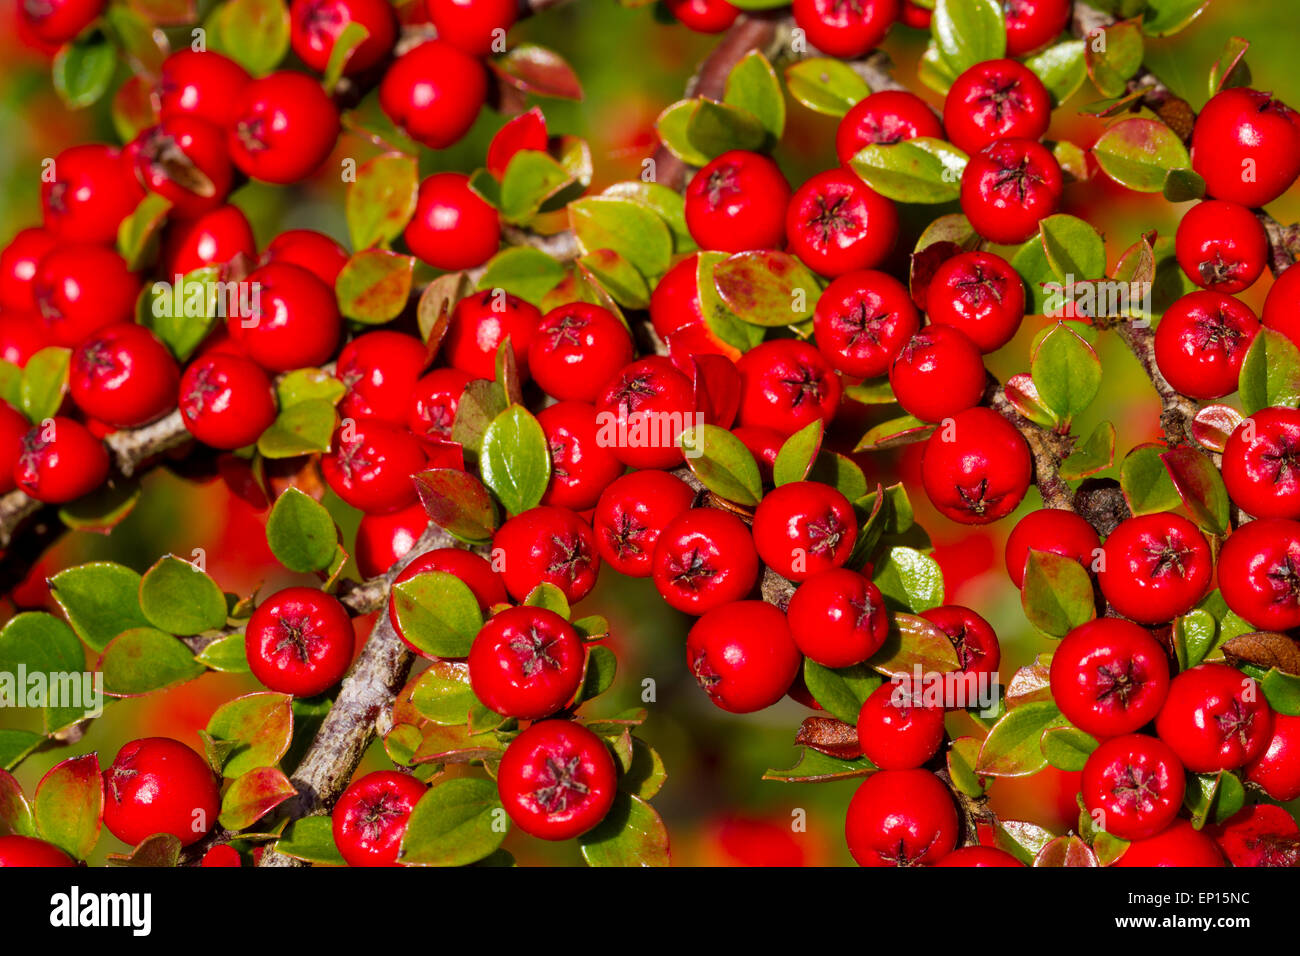 Wall Cotoneaster (Cotoneaster horizontalis) ripe berries on a shrub in a garden. Powys, Wales. October. Stock Photo